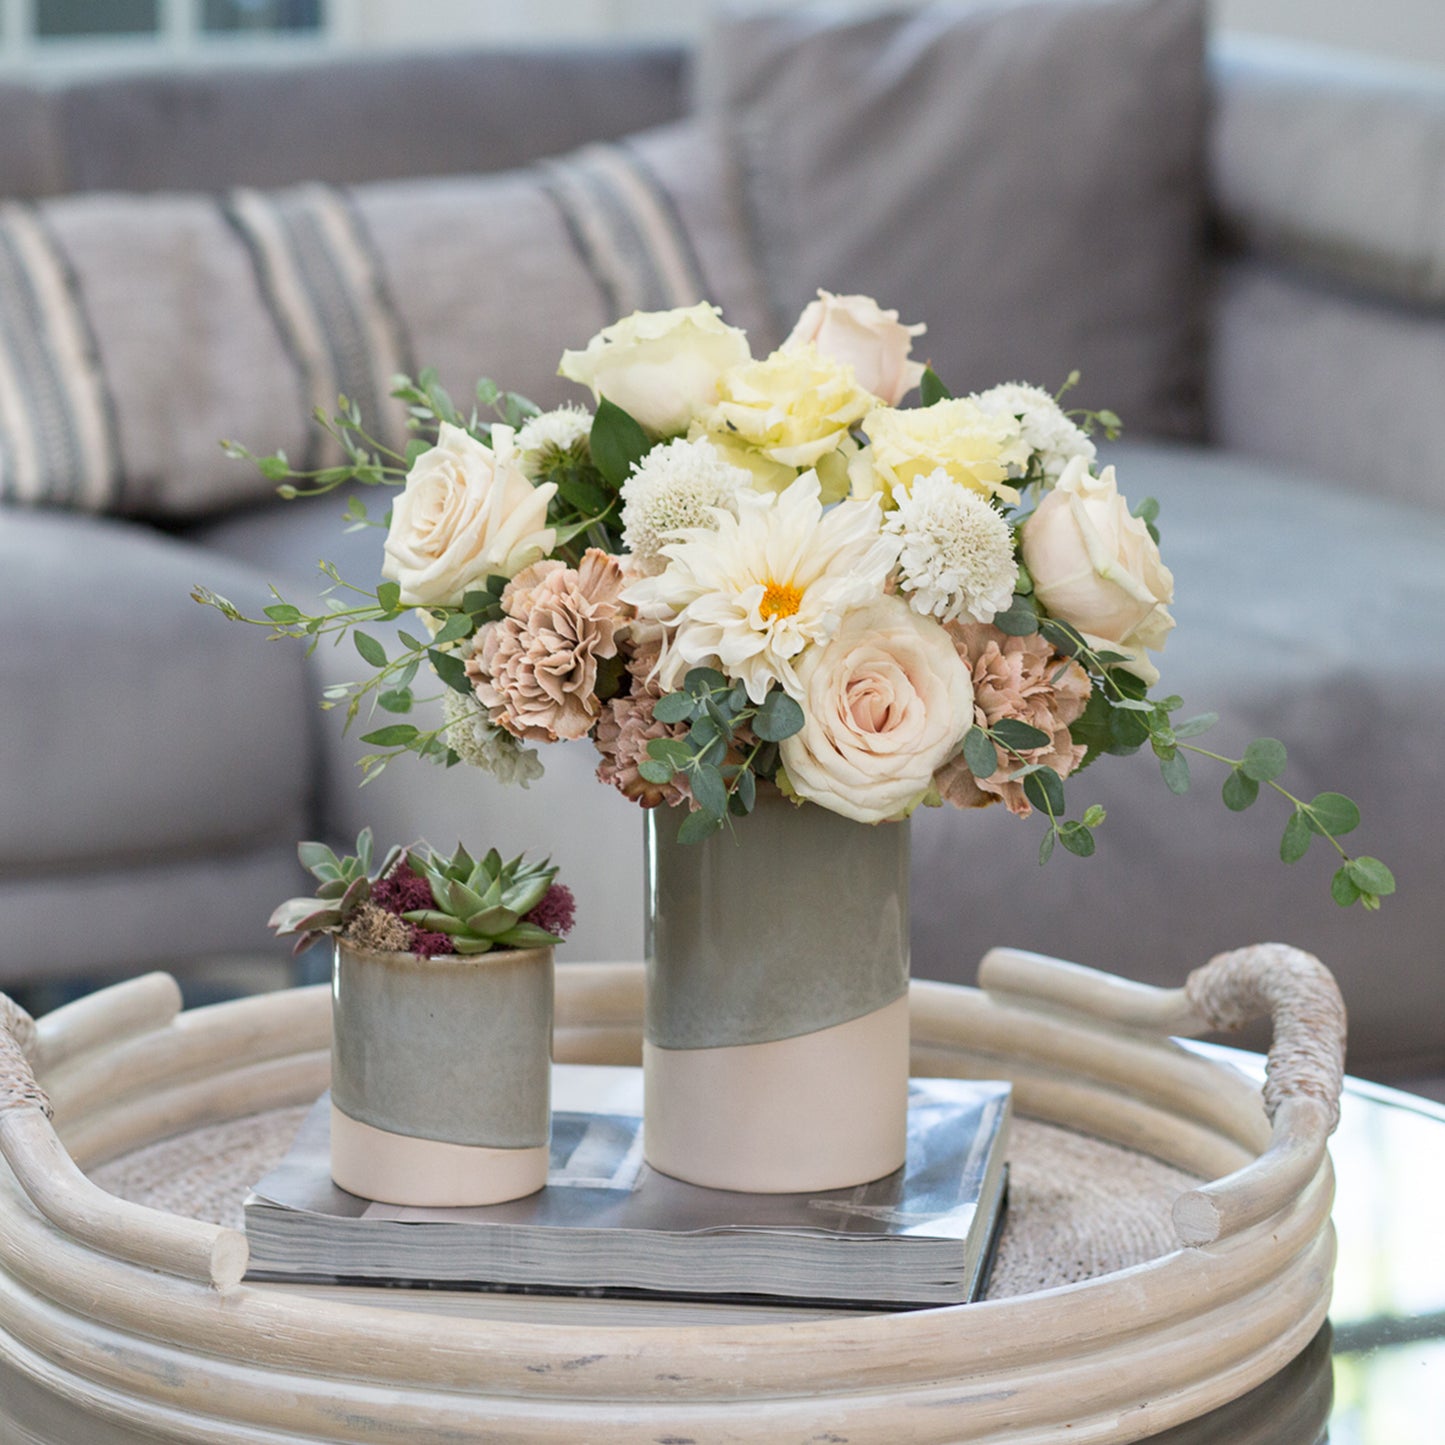 An elegant floral arrangement in a 6.5-inch ceramic essential vase accompanied by a smaller 4-inch version, both in a dual-tone design with pale green and blush pink. The larger vase holds a bouquet of creamy roses, pale yellow flowers, and soft greenery, while the smaller one contains a succulent with accents of deep purple. This display sits atop a round wicker tray on a glass table, with a cozy grey sofa adorned with pillows in the background.